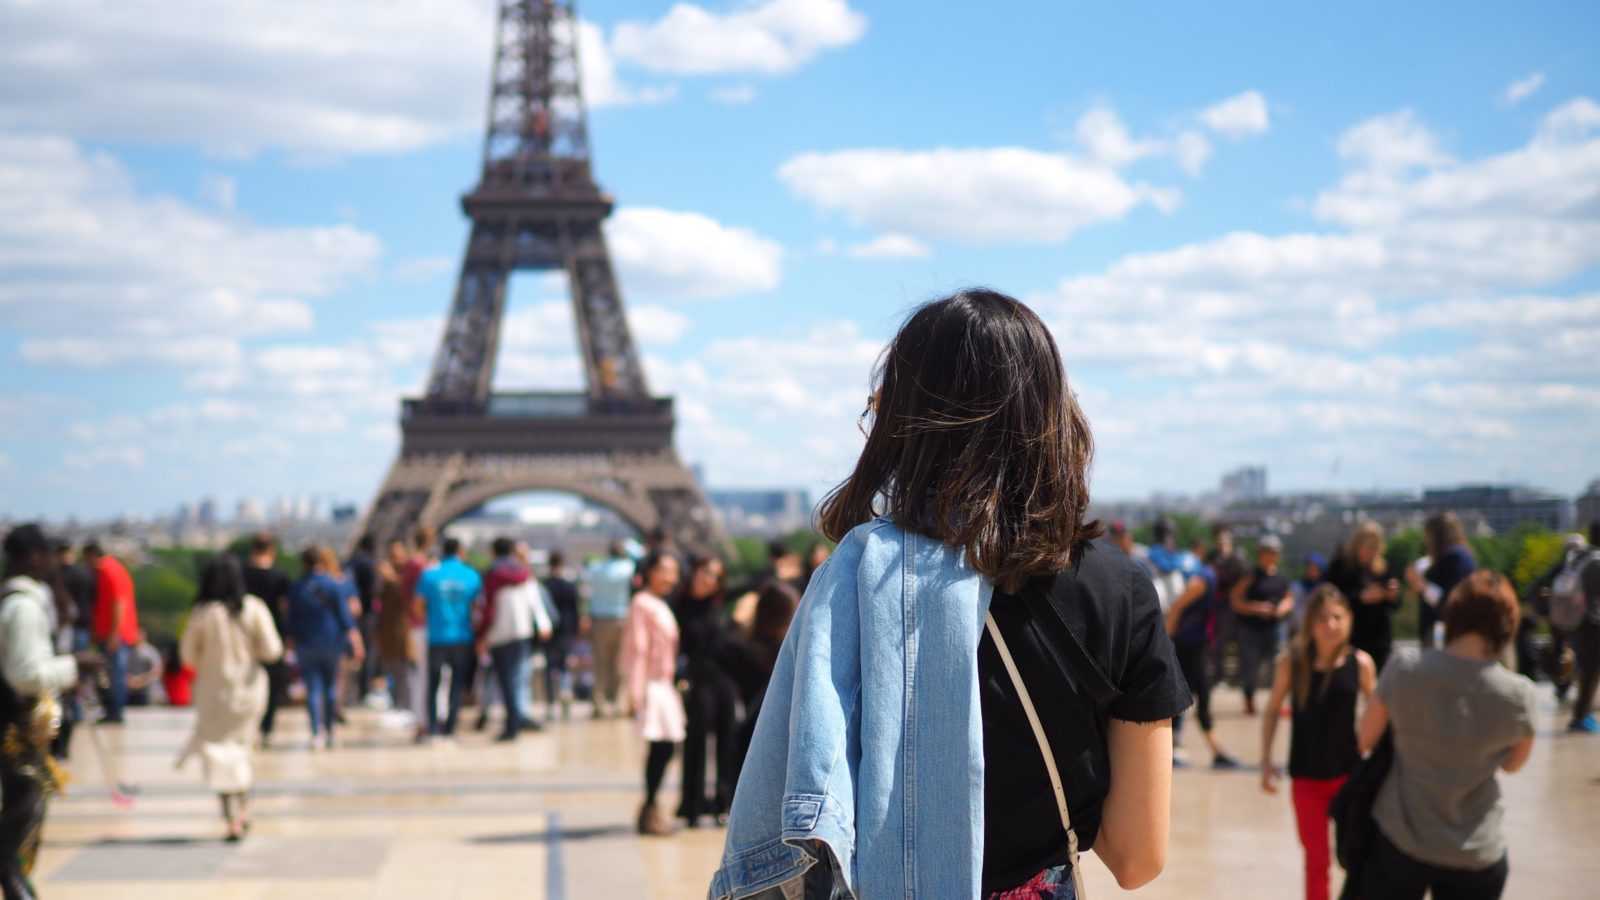 Woman in foreground looking out at a crowd of people walking and standing wearing a wide variety of outfits and shoes with the Eiffel Tower